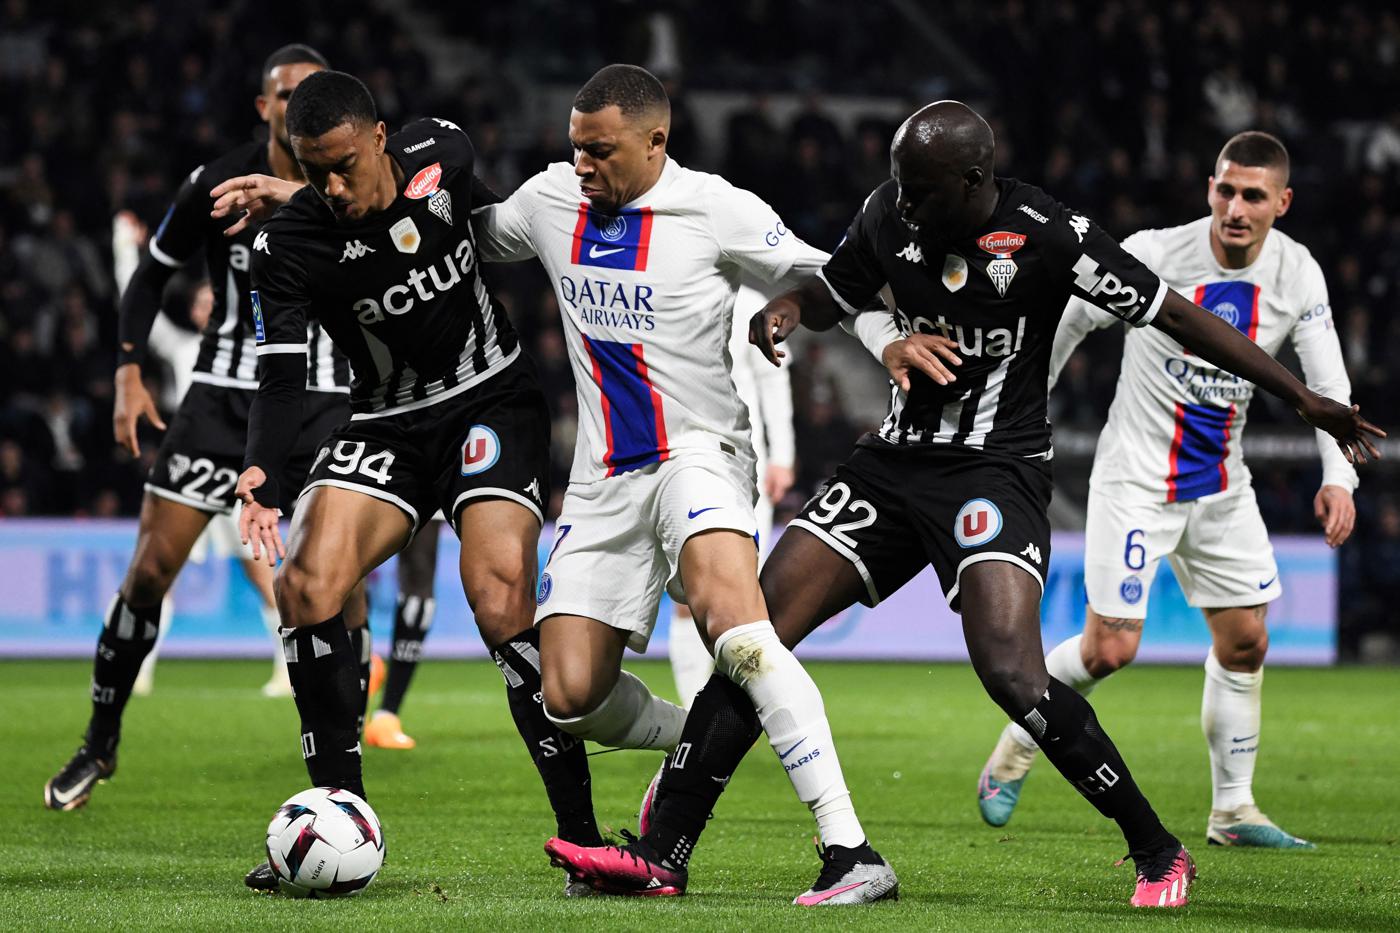 Angers vs PSG - 1:2. French Championship, round 32. Match review, statistics